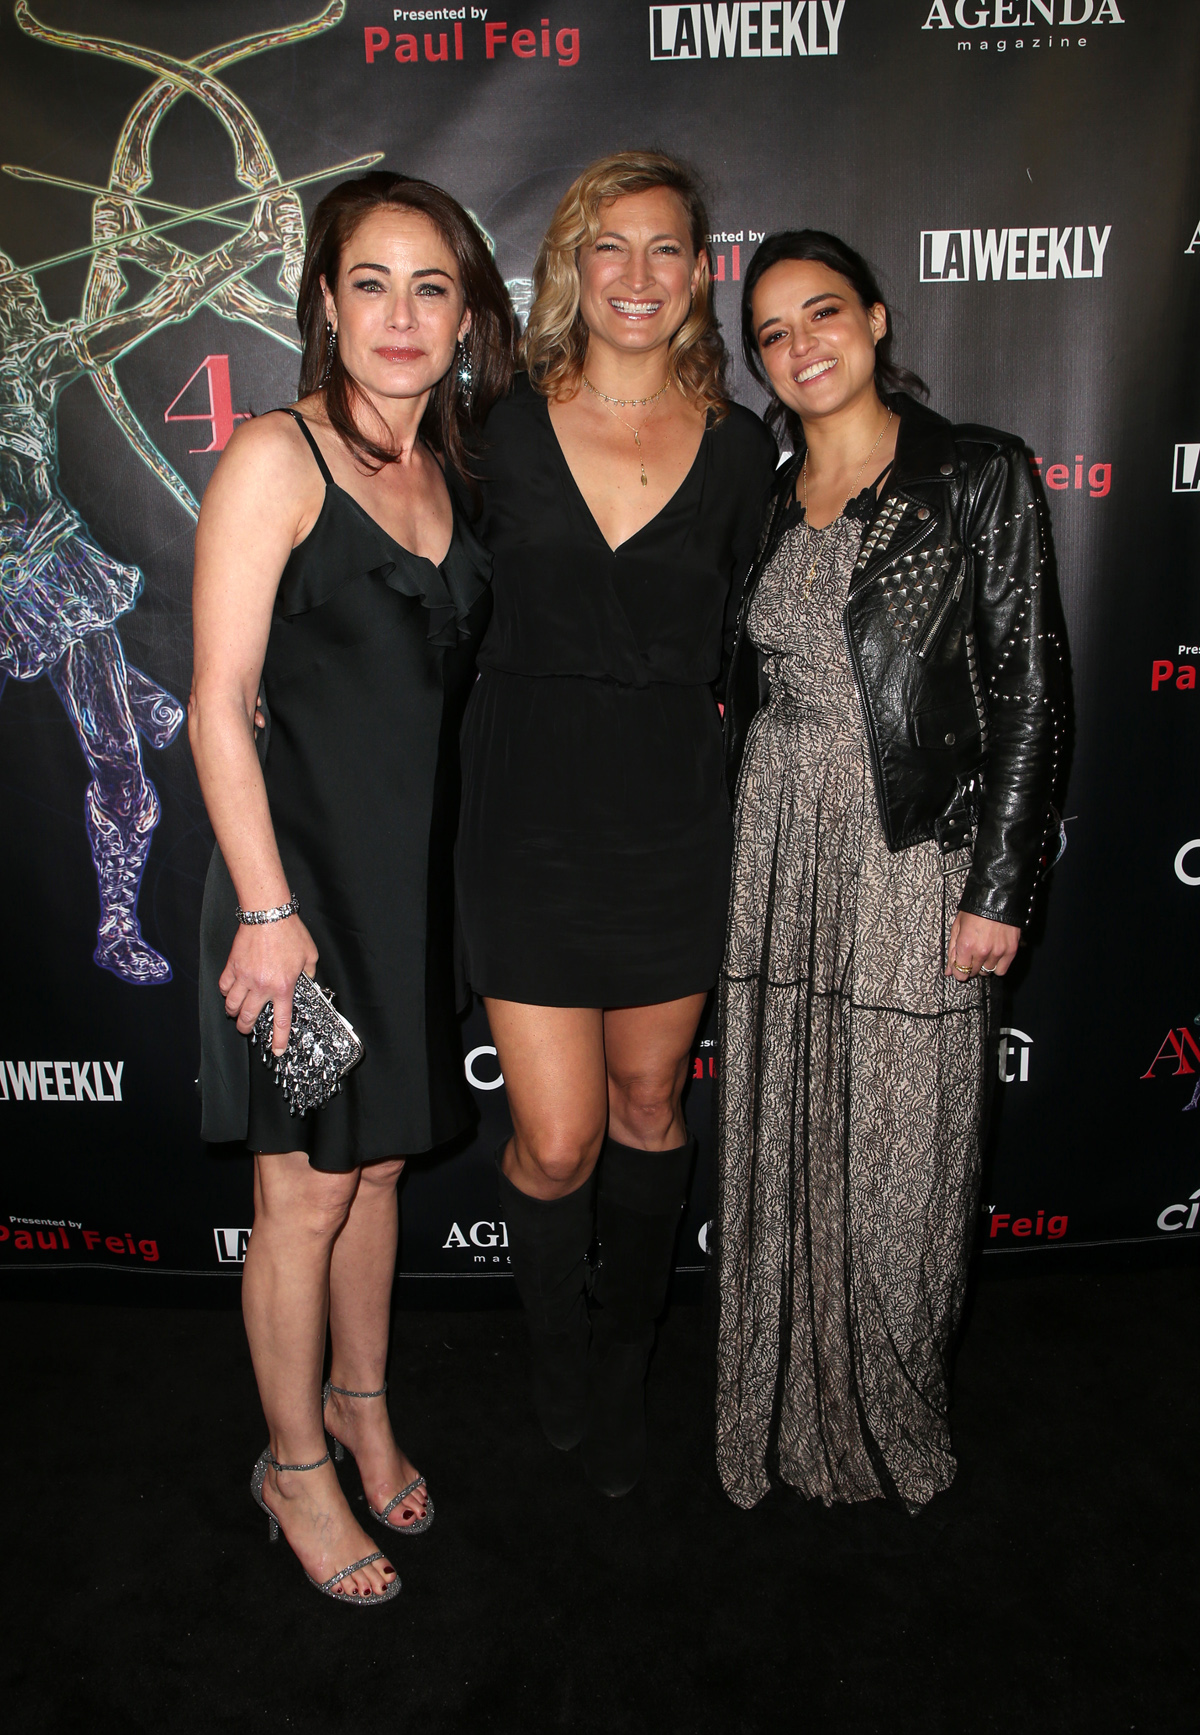 BEVERLY HILLS, CA - APRIL 26: Yancy Butler, Zoe Bell, Michelle Rodriguez, at the 2018 Artemis Awards Gala at the Ahrya Fine Arts Theater in Beverly Hills, California on April 26, 2018. Credit: Faye Sadou/MediaPunch